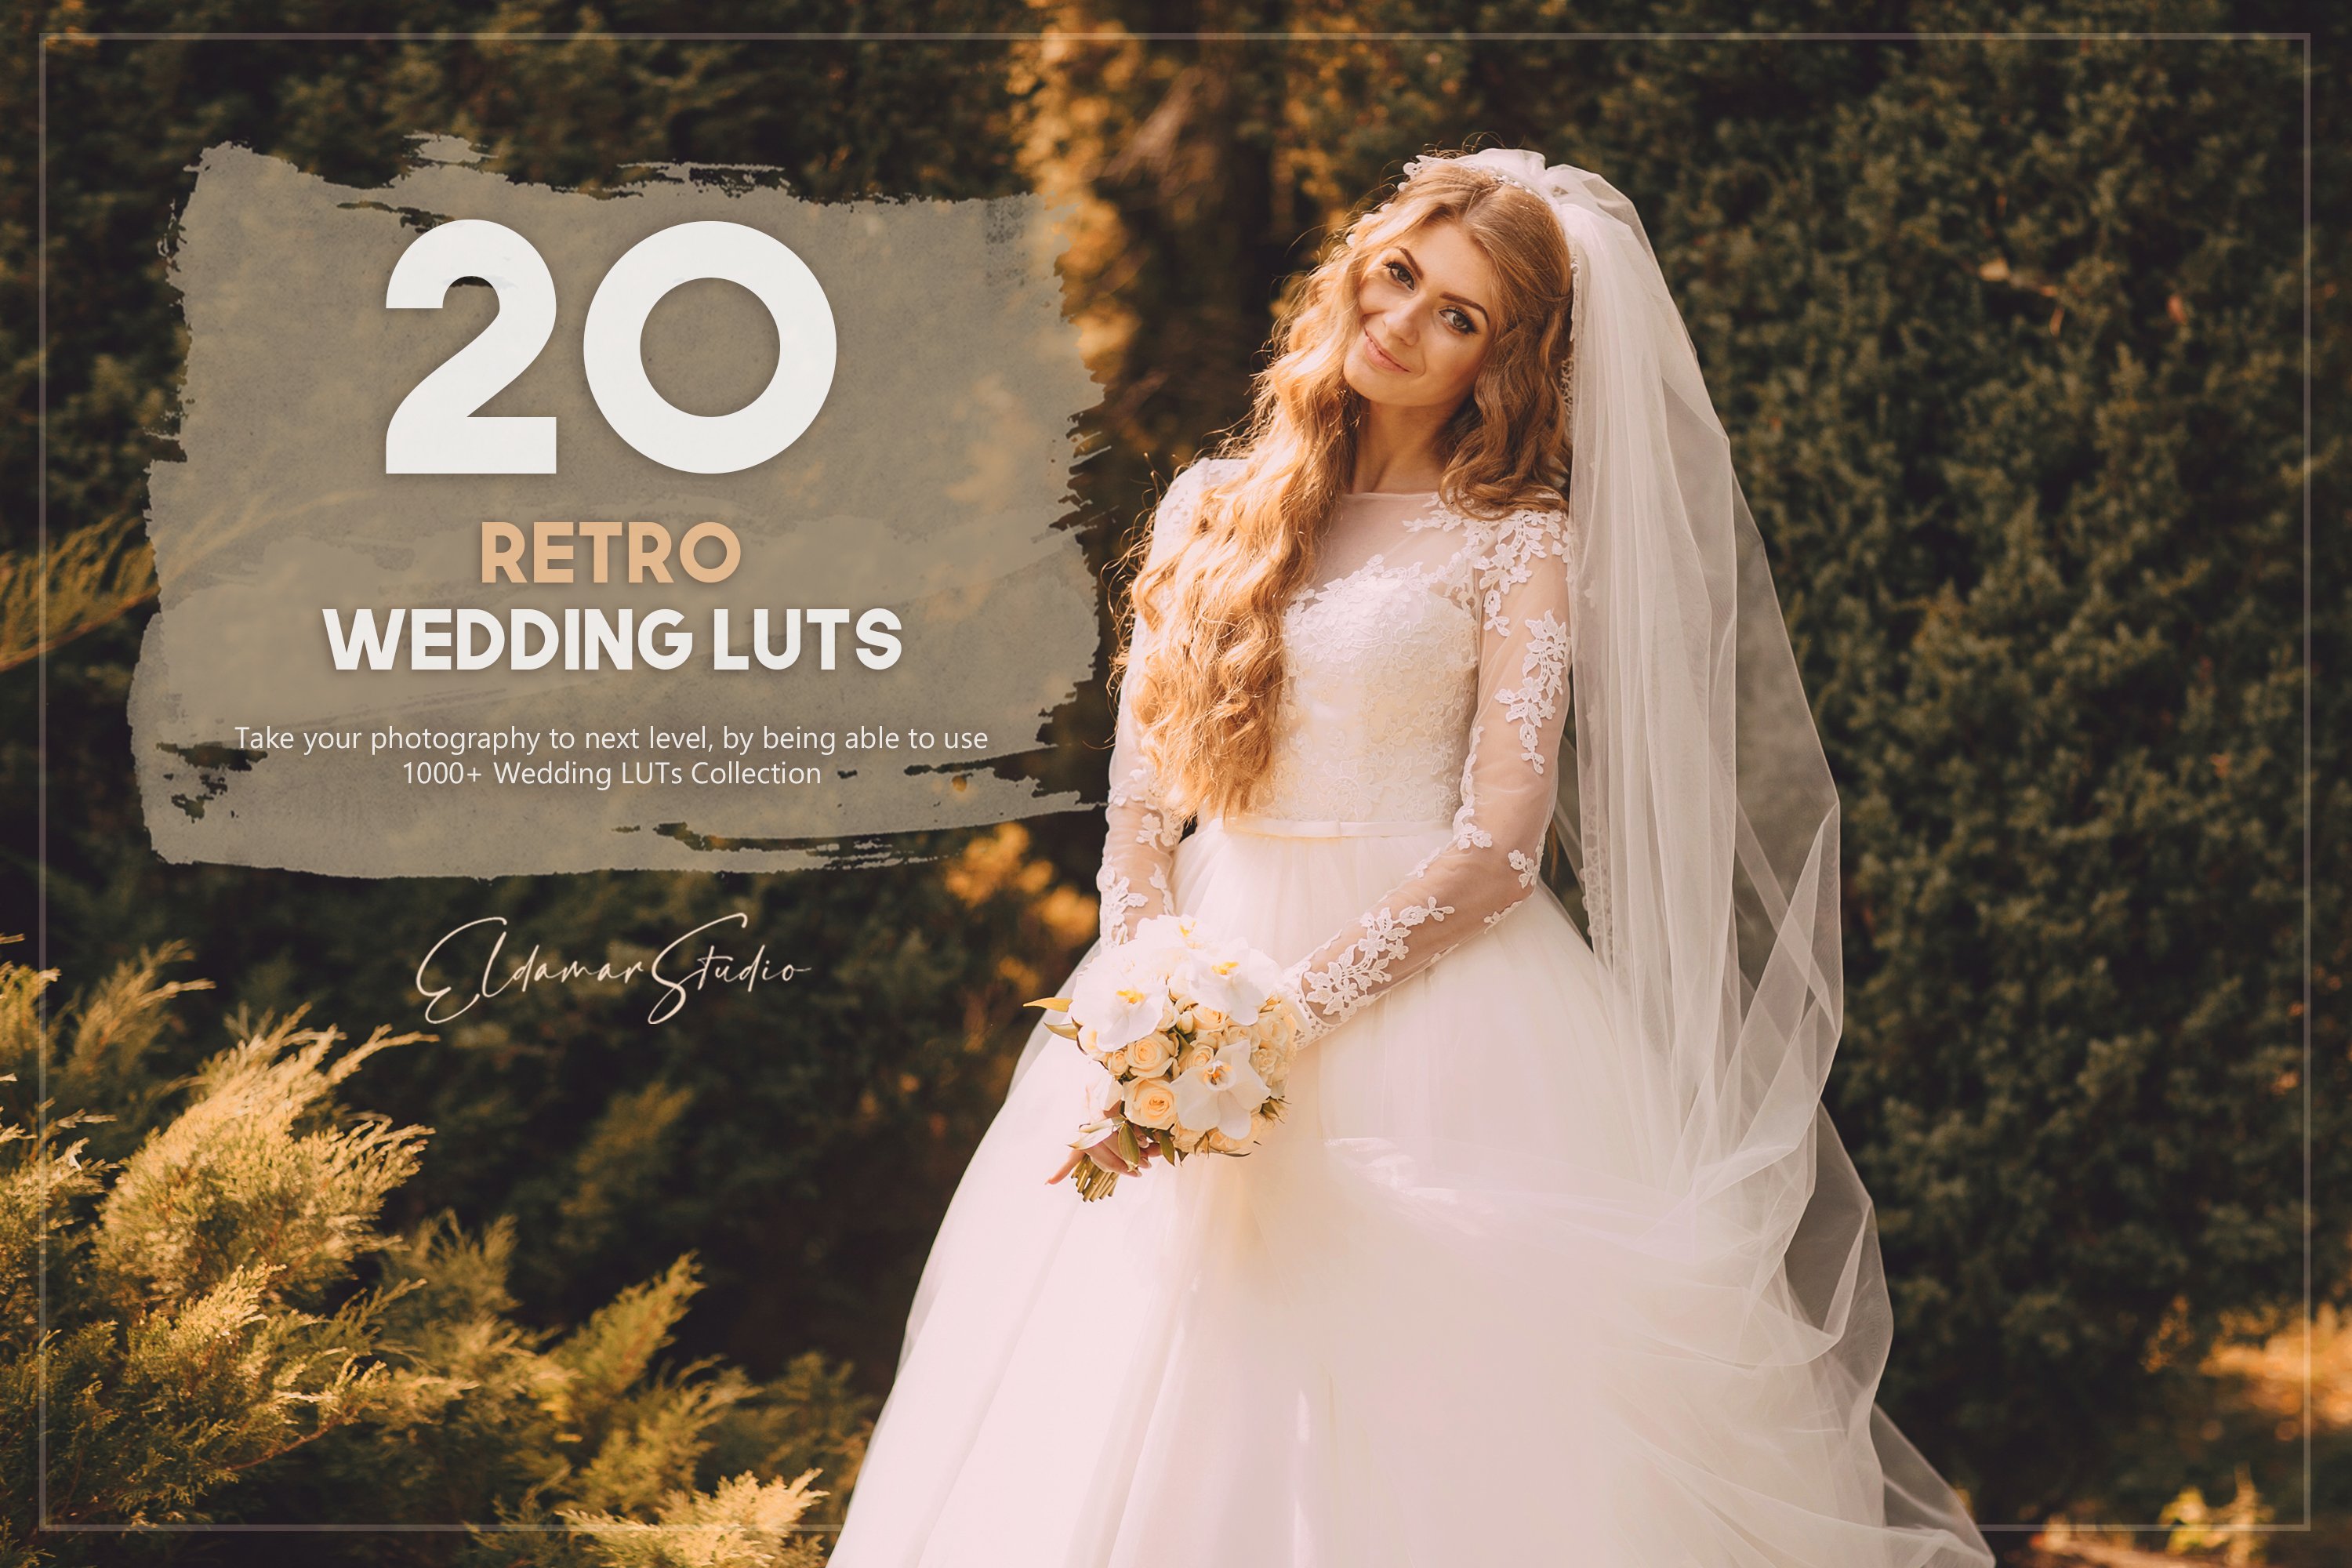 20 Retro Wedding LUTs Packcover image.